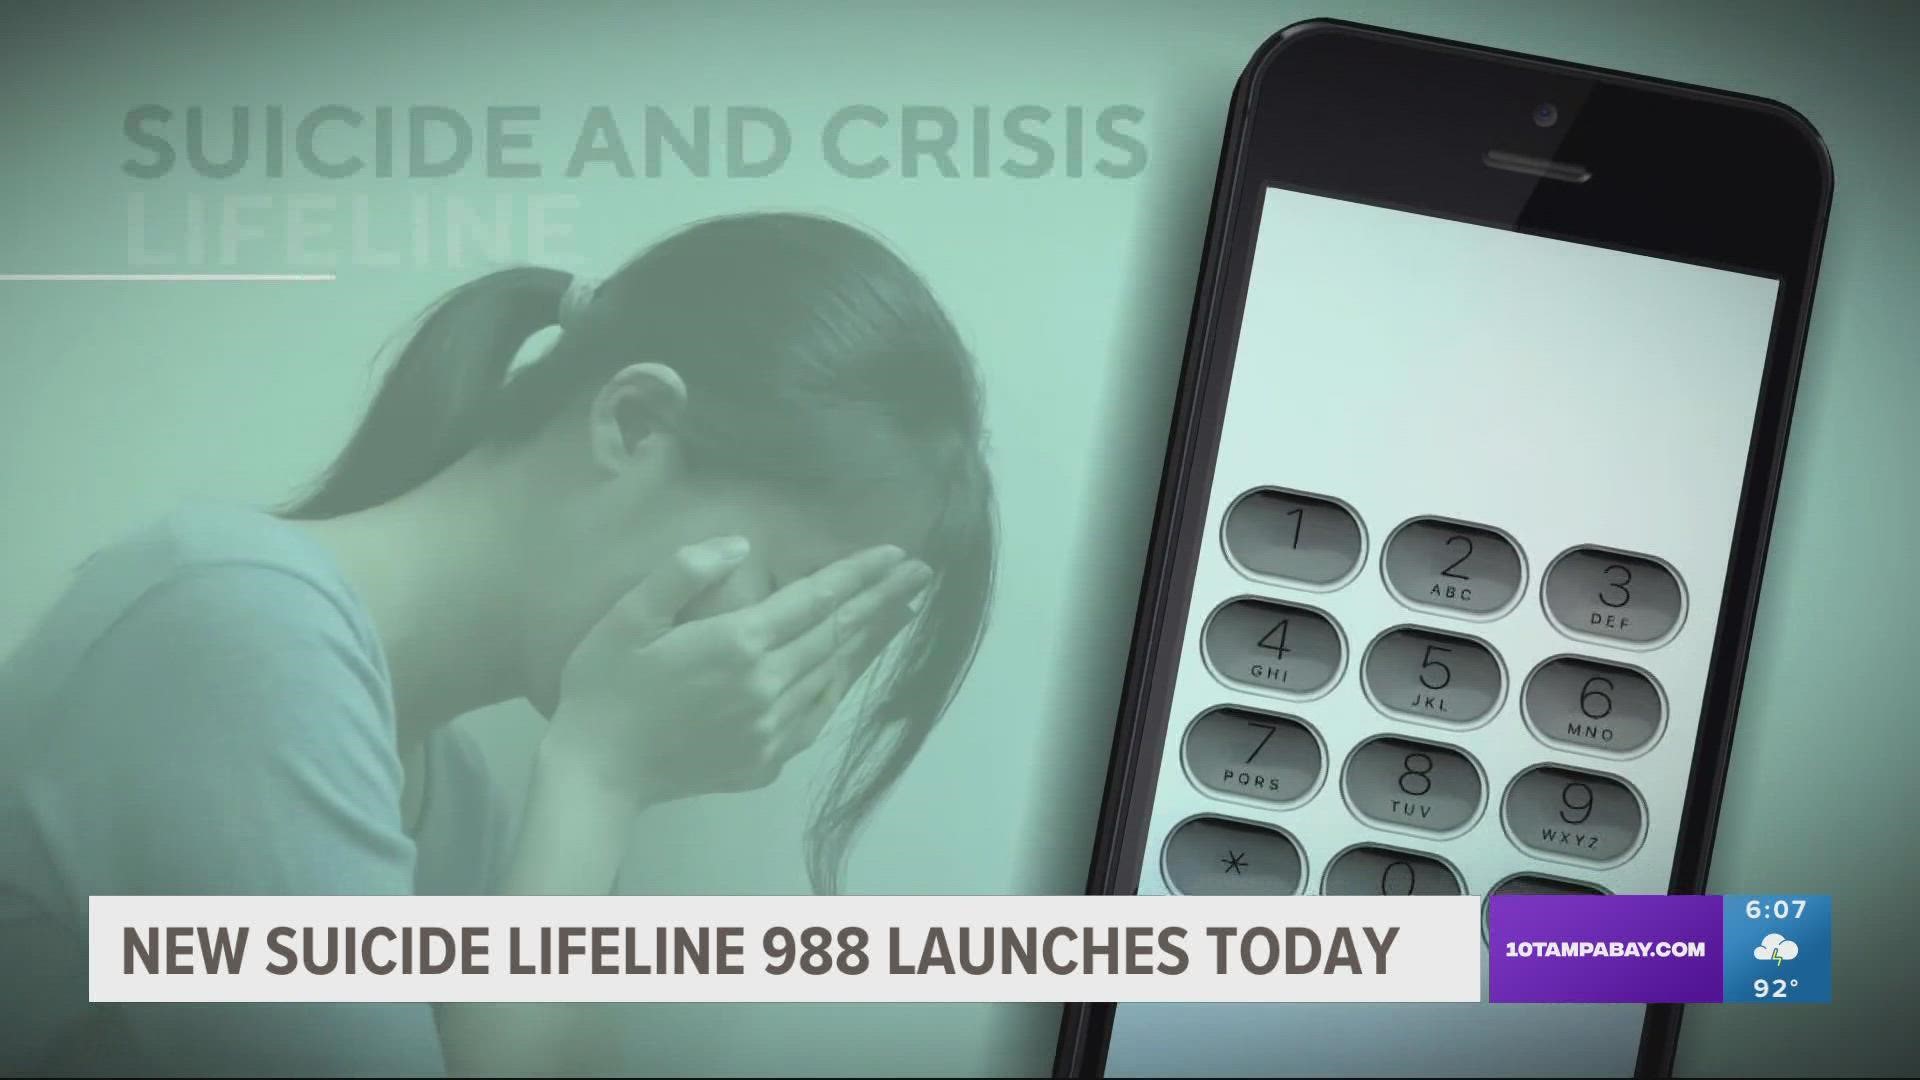 Instead of a dispatcher sending police or paramedics, 988 will connect people who call or text with trained mental health counselors, and eventually much more.